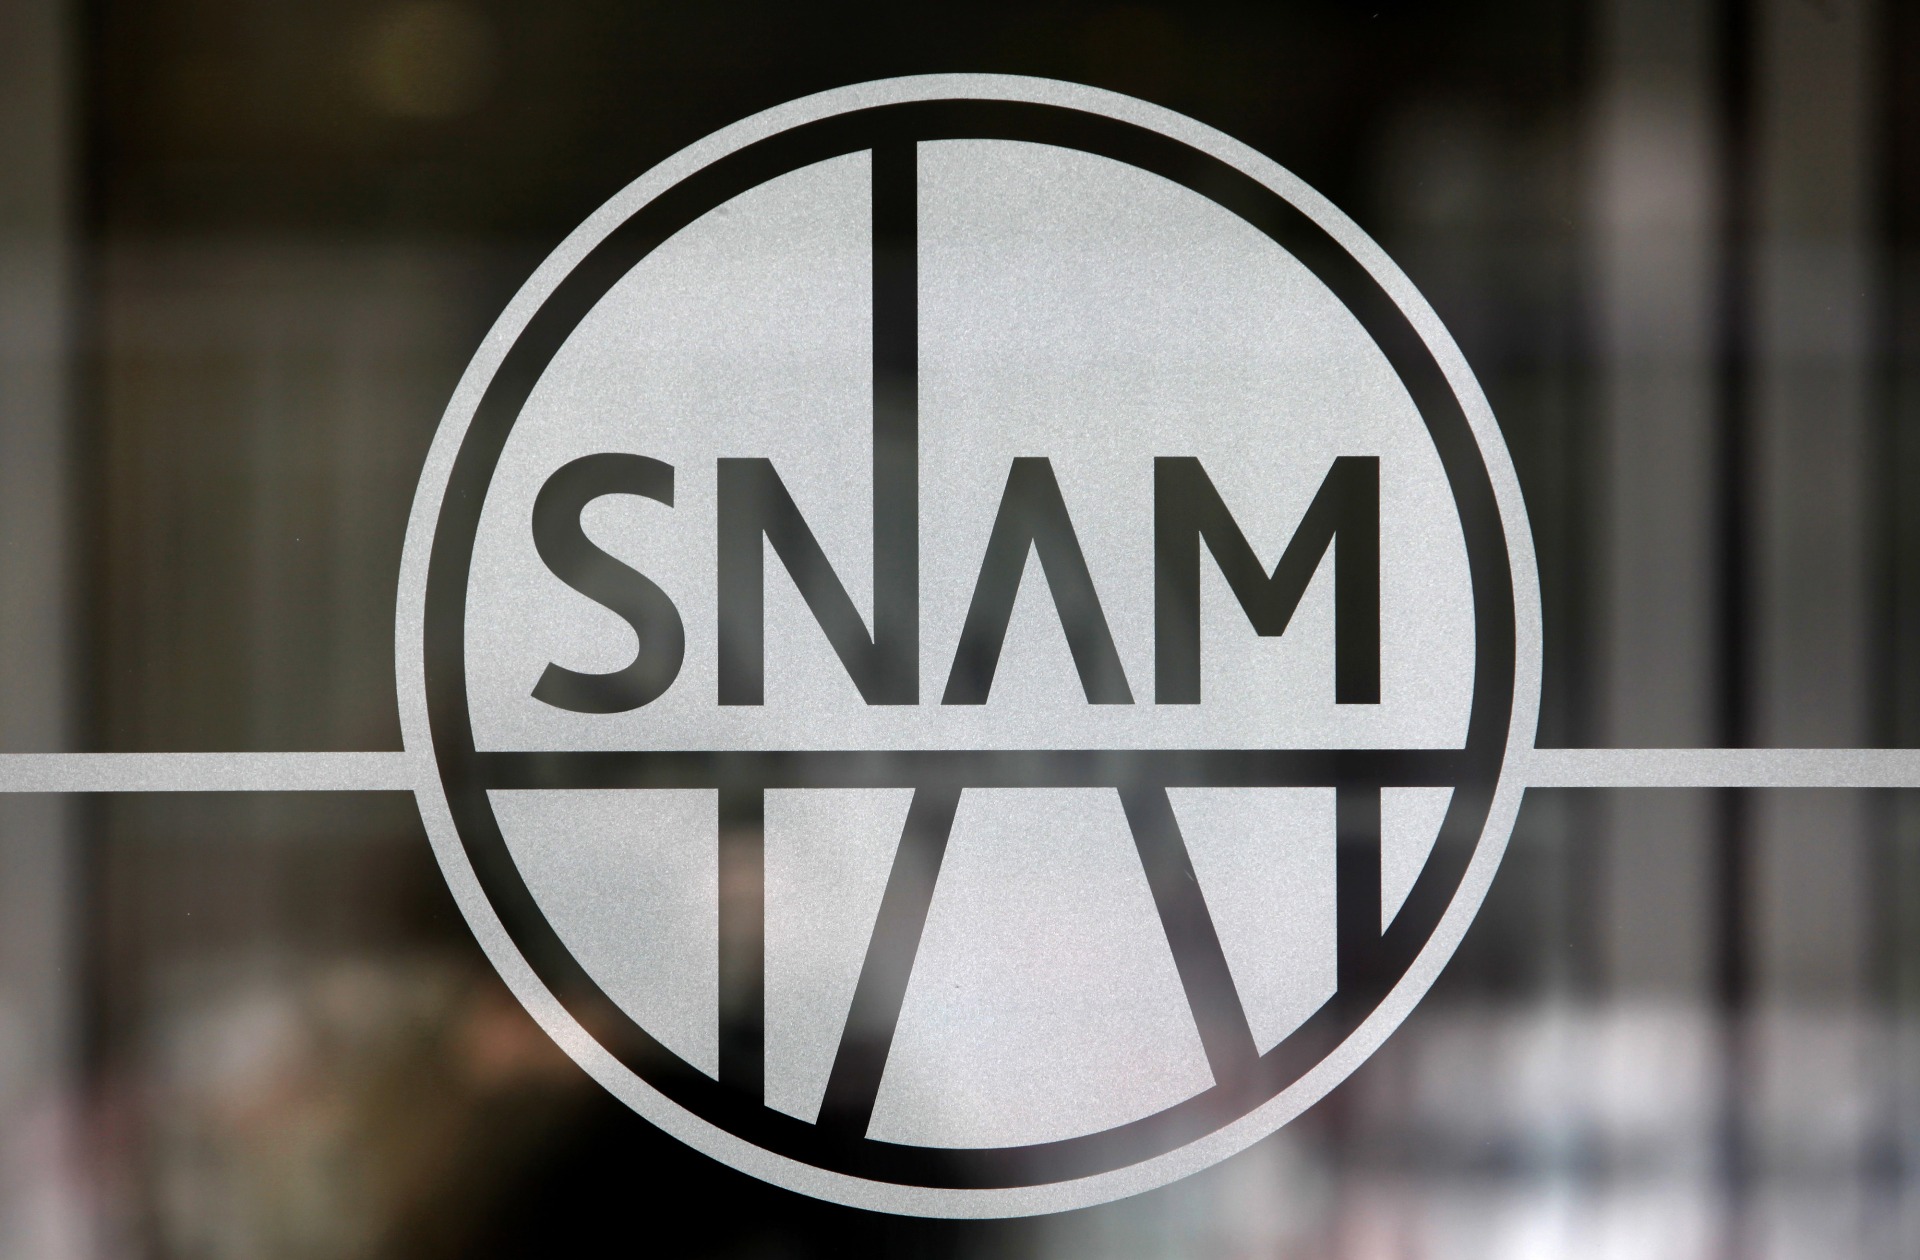 The logo of Snam SpA, sits on a door at the company's headquarters in Milan.